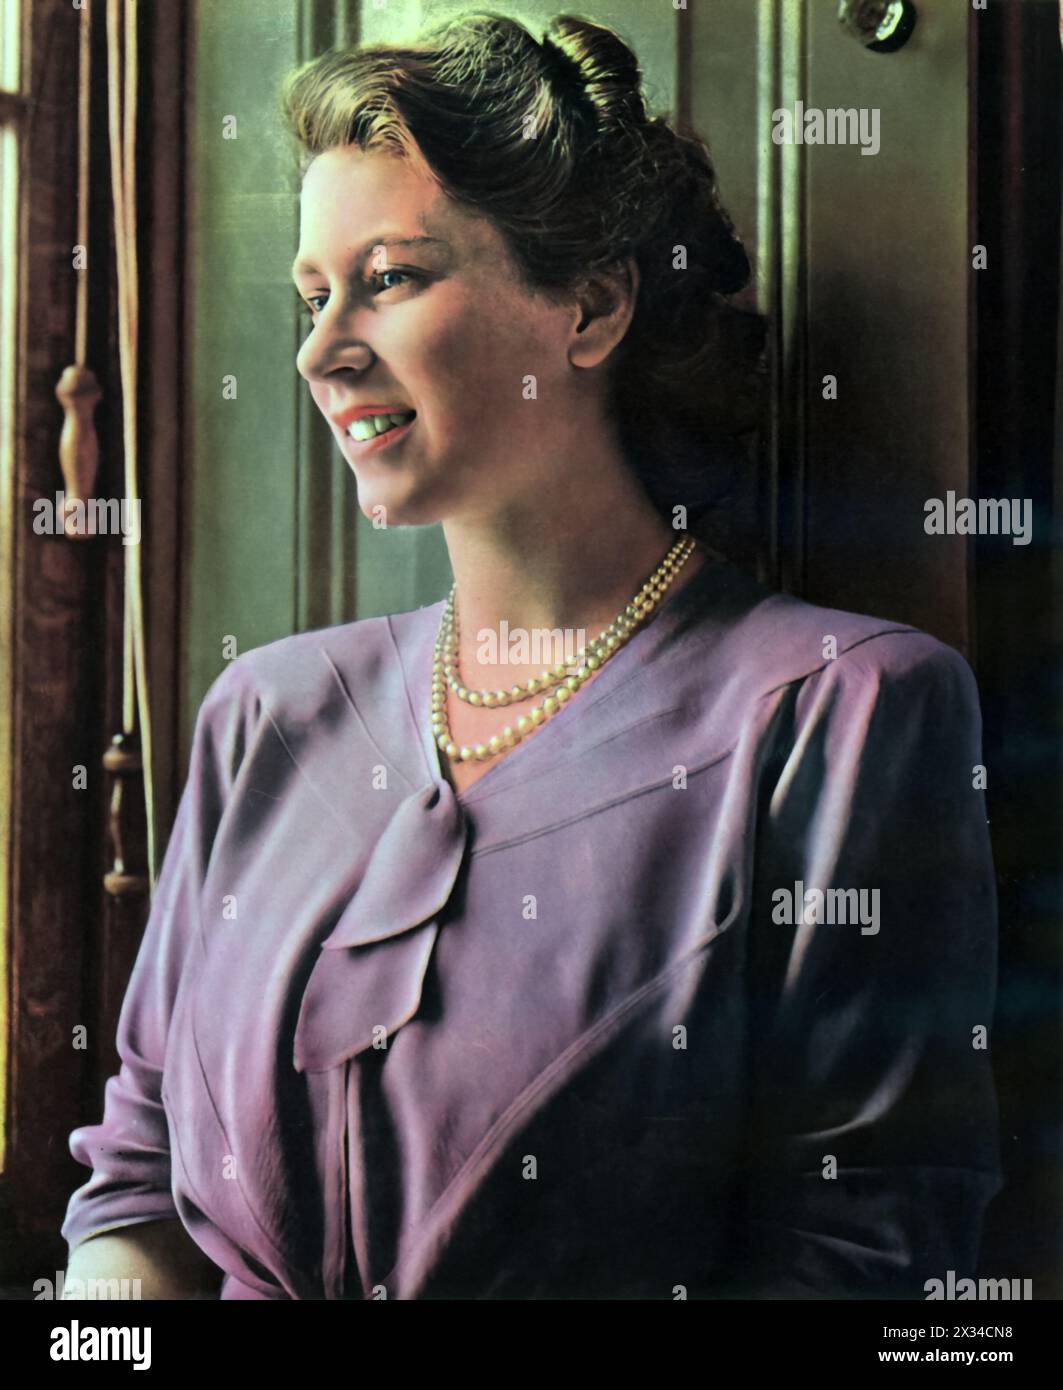 Princess Elizabeth is pictured at Buckingham Palace at the age of 20 in this portrait taken in 1946, shortly after the end of the Second World War. This image marks the beginning of her path to the throne. She married Philip, the Duke of Edinburgh, in 1947, and they welcomed their firstborn son, Prince Charles, the next year. Stock Photo